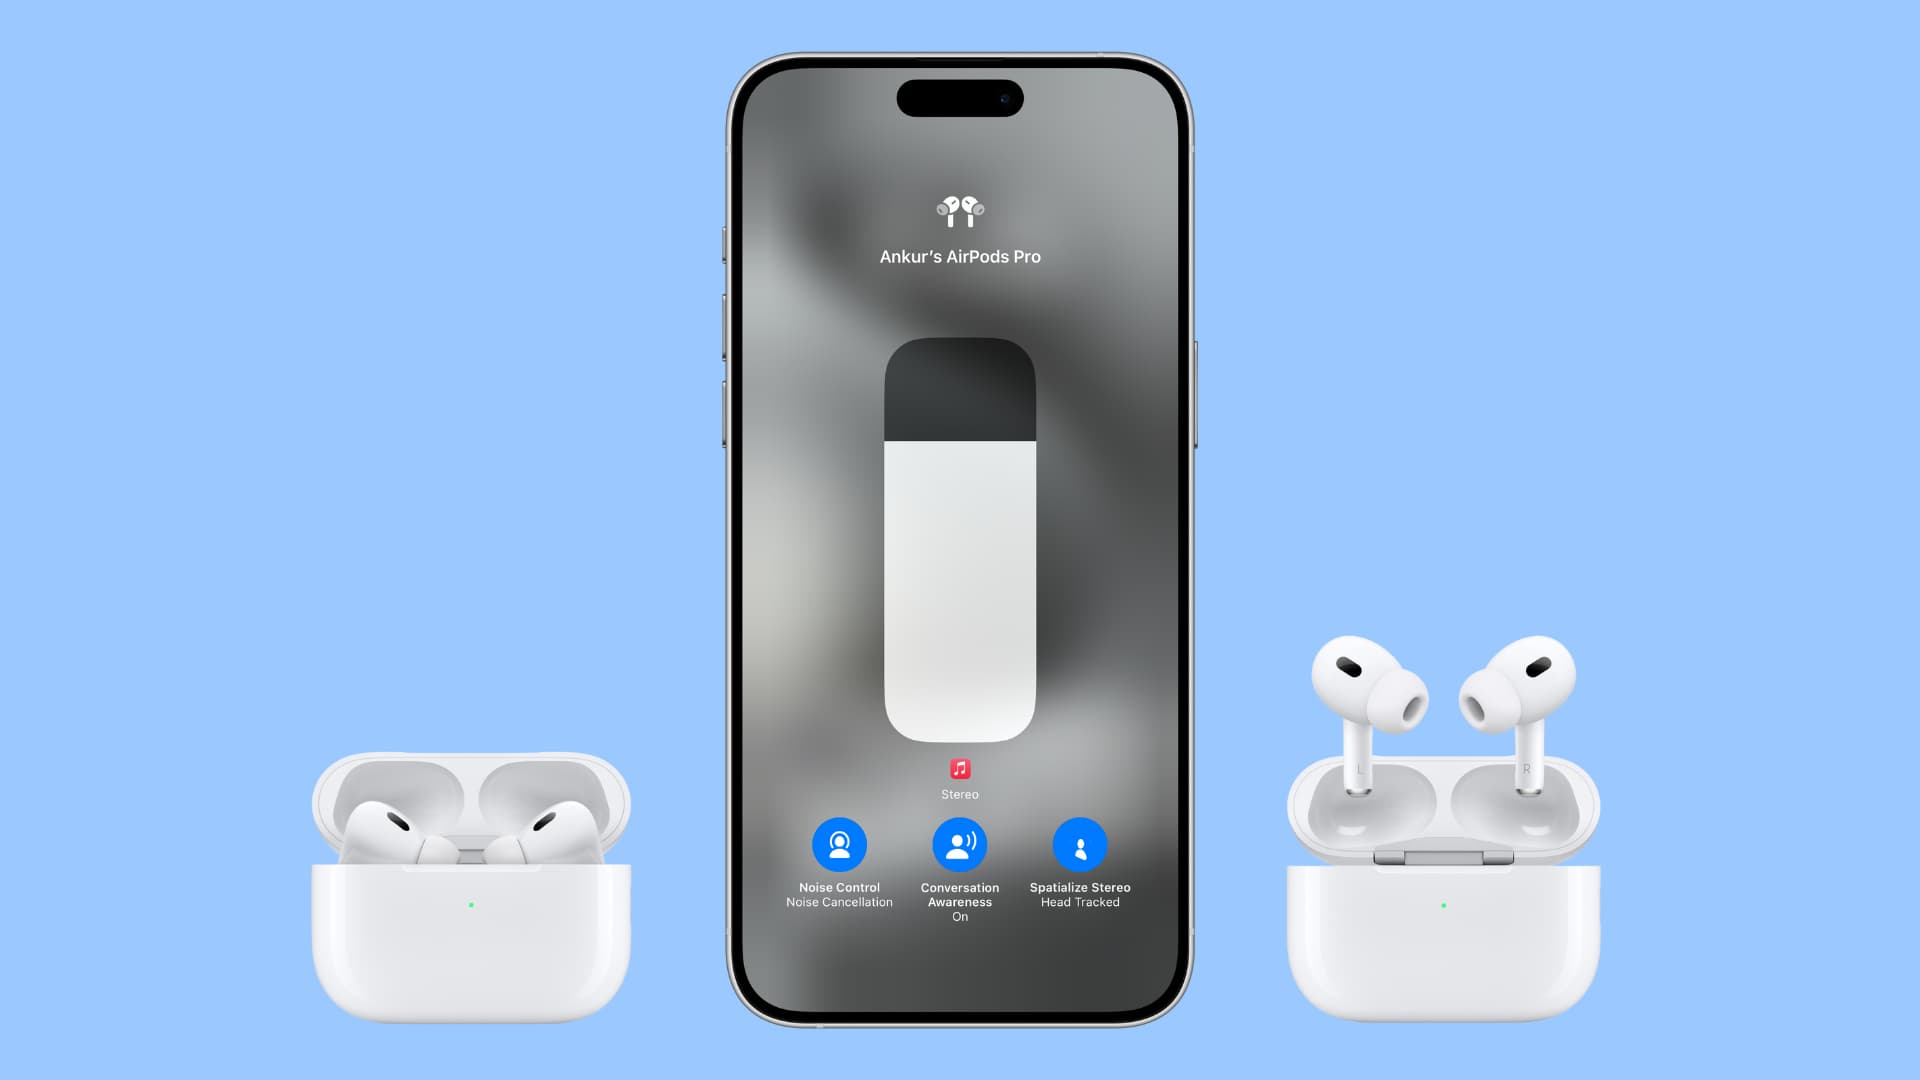 iPhone showing volume options with two AirPods Pros nearby